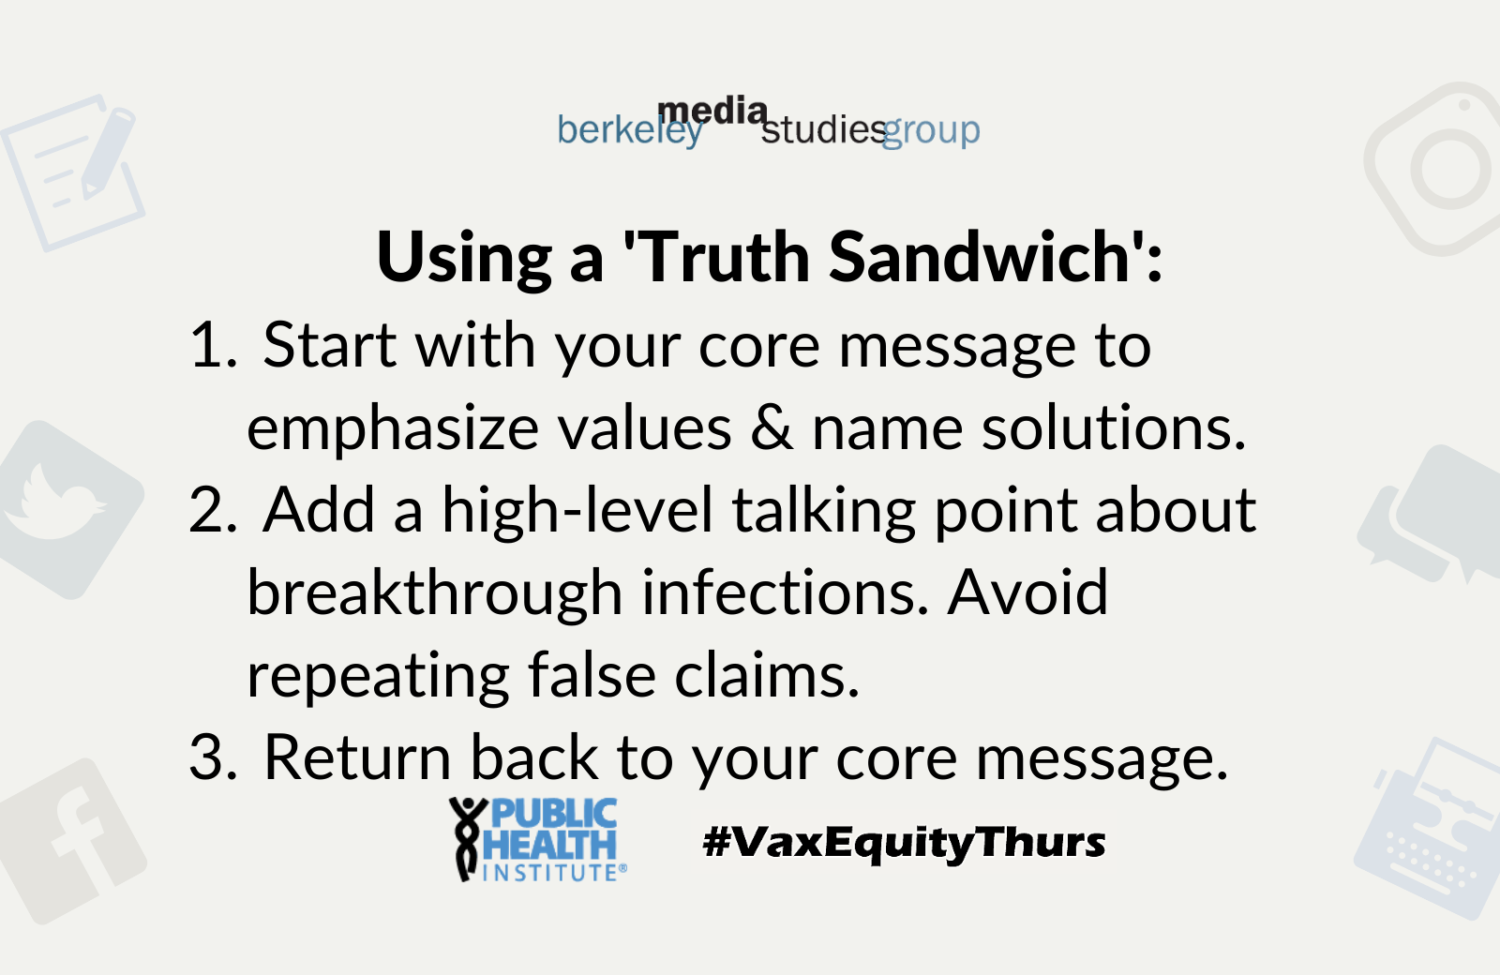 Using a truth sandwich: Start with your core message to emphasize values & name solutions. Add a high-level talking point about breakthrough infections. Avoid repeating false claims. Return back to your core message.